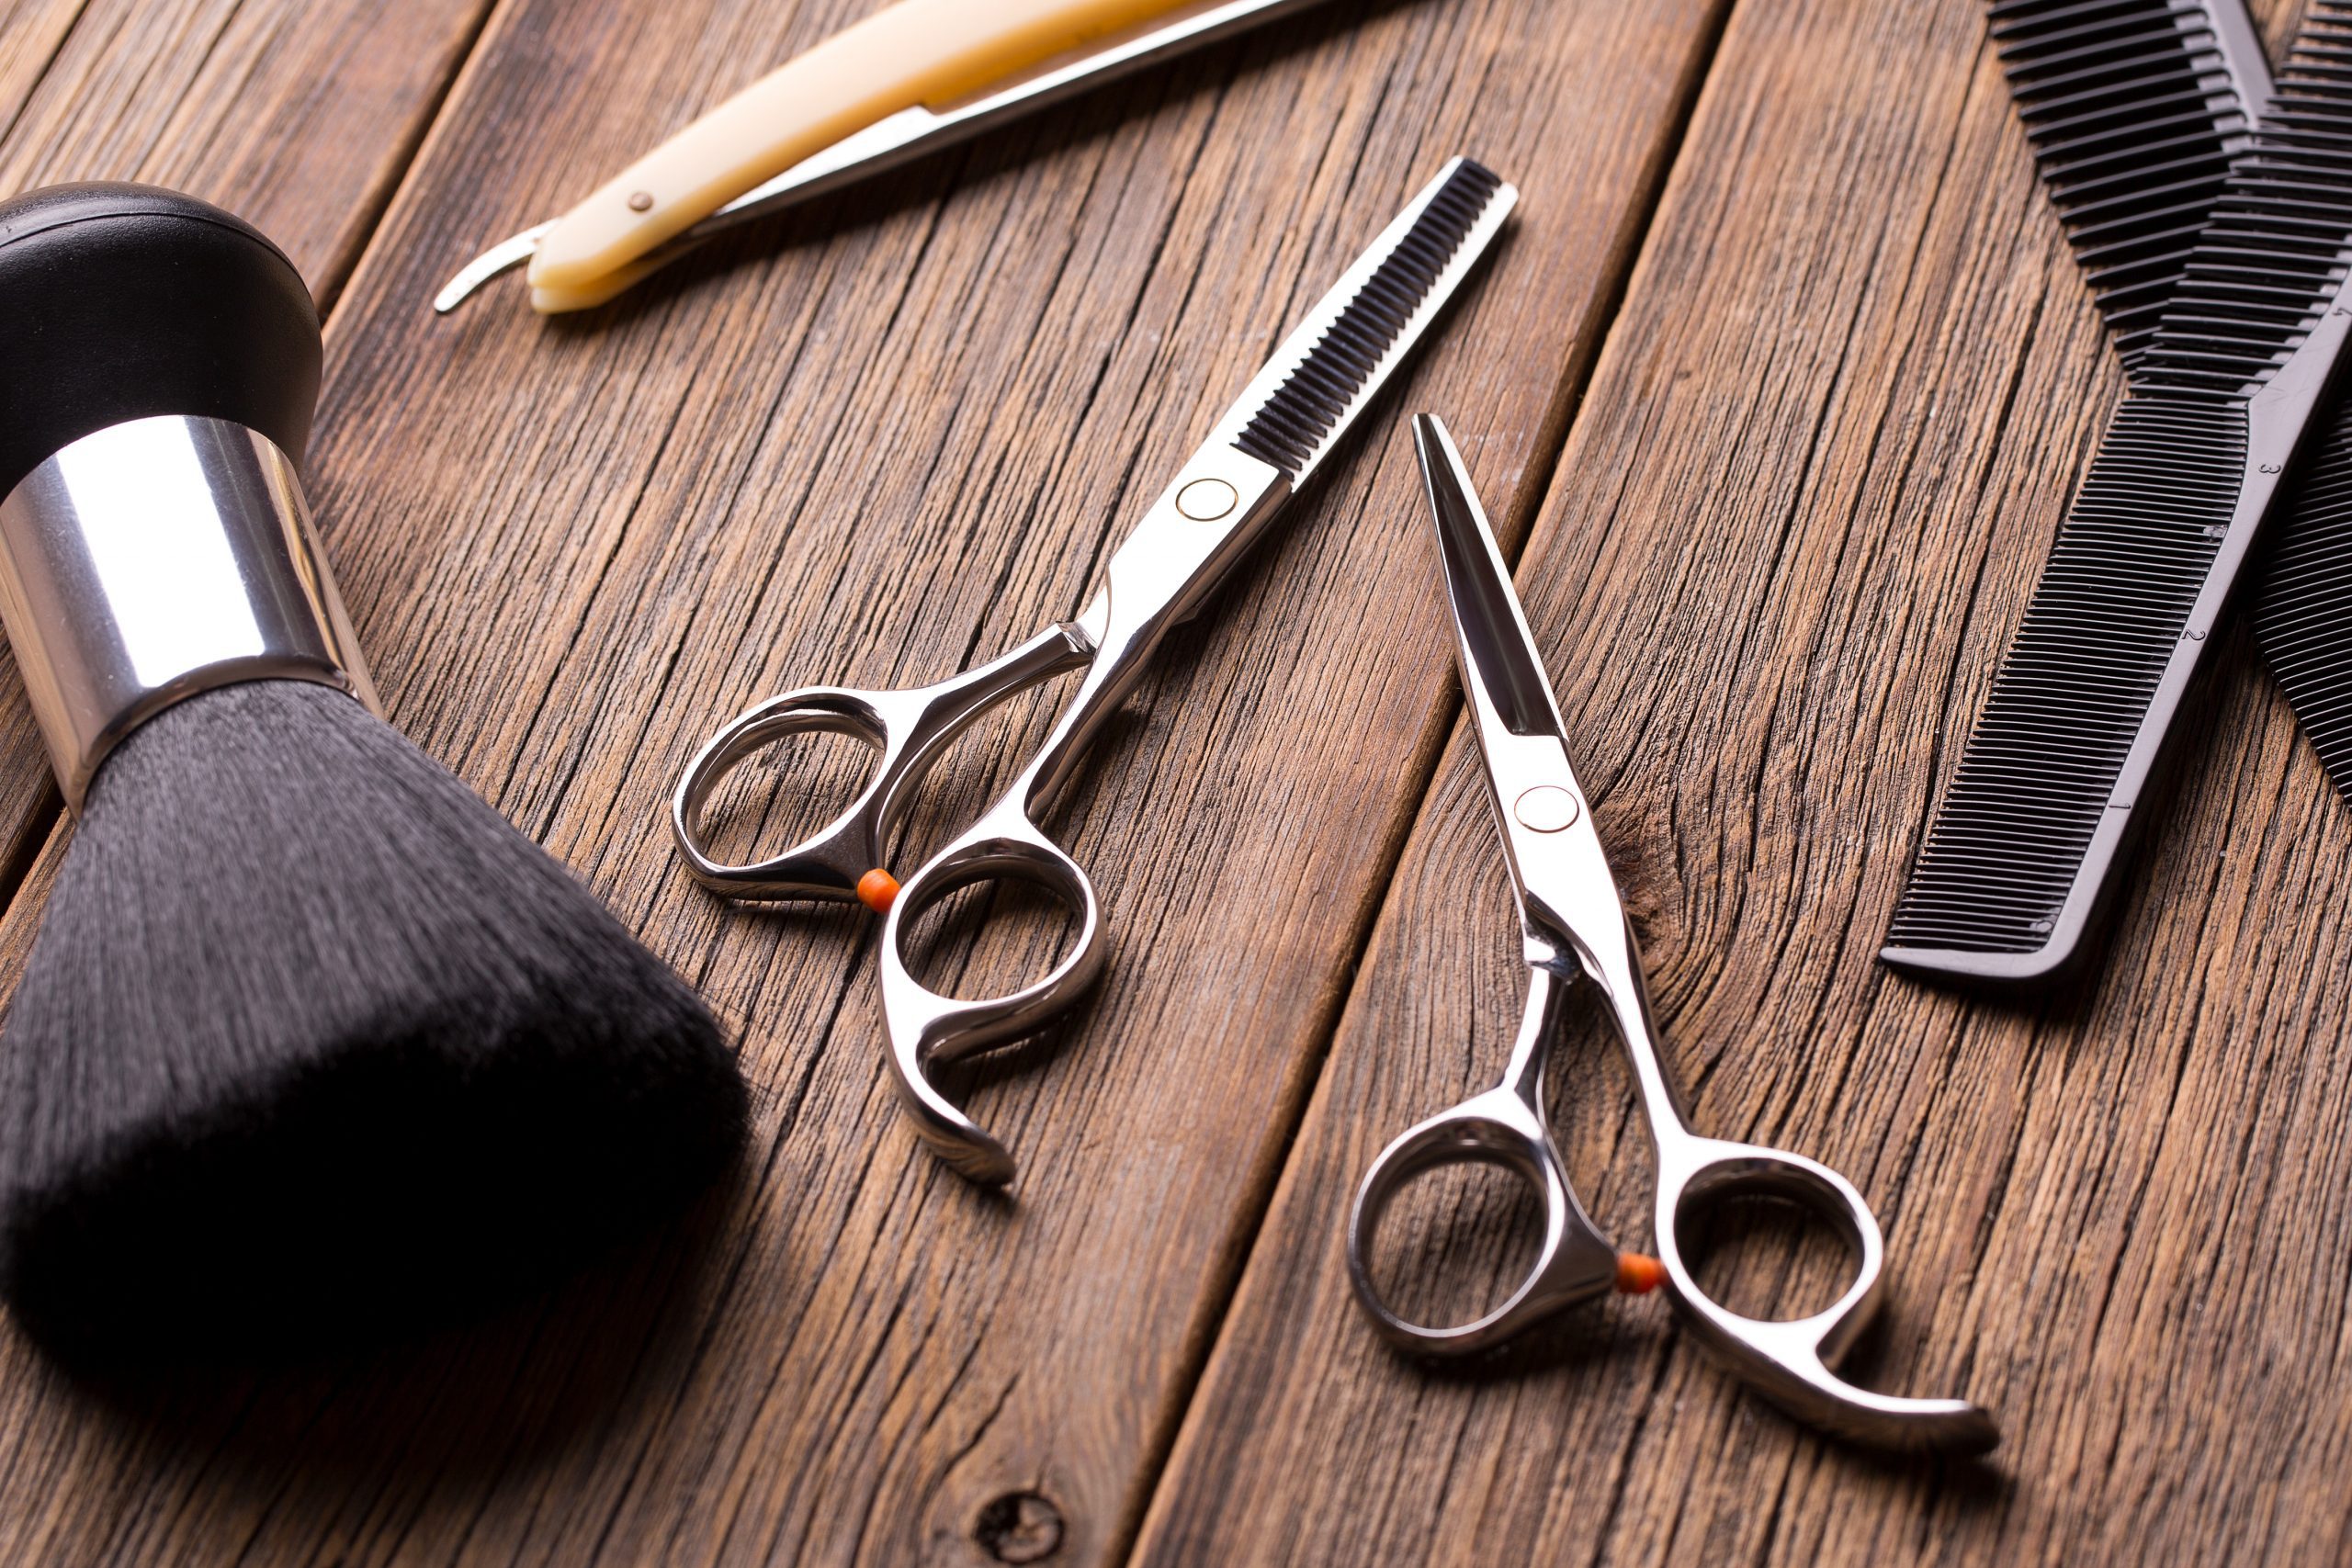 The Best Professional Barber Shears | Reviews, Ratings, Comparisons